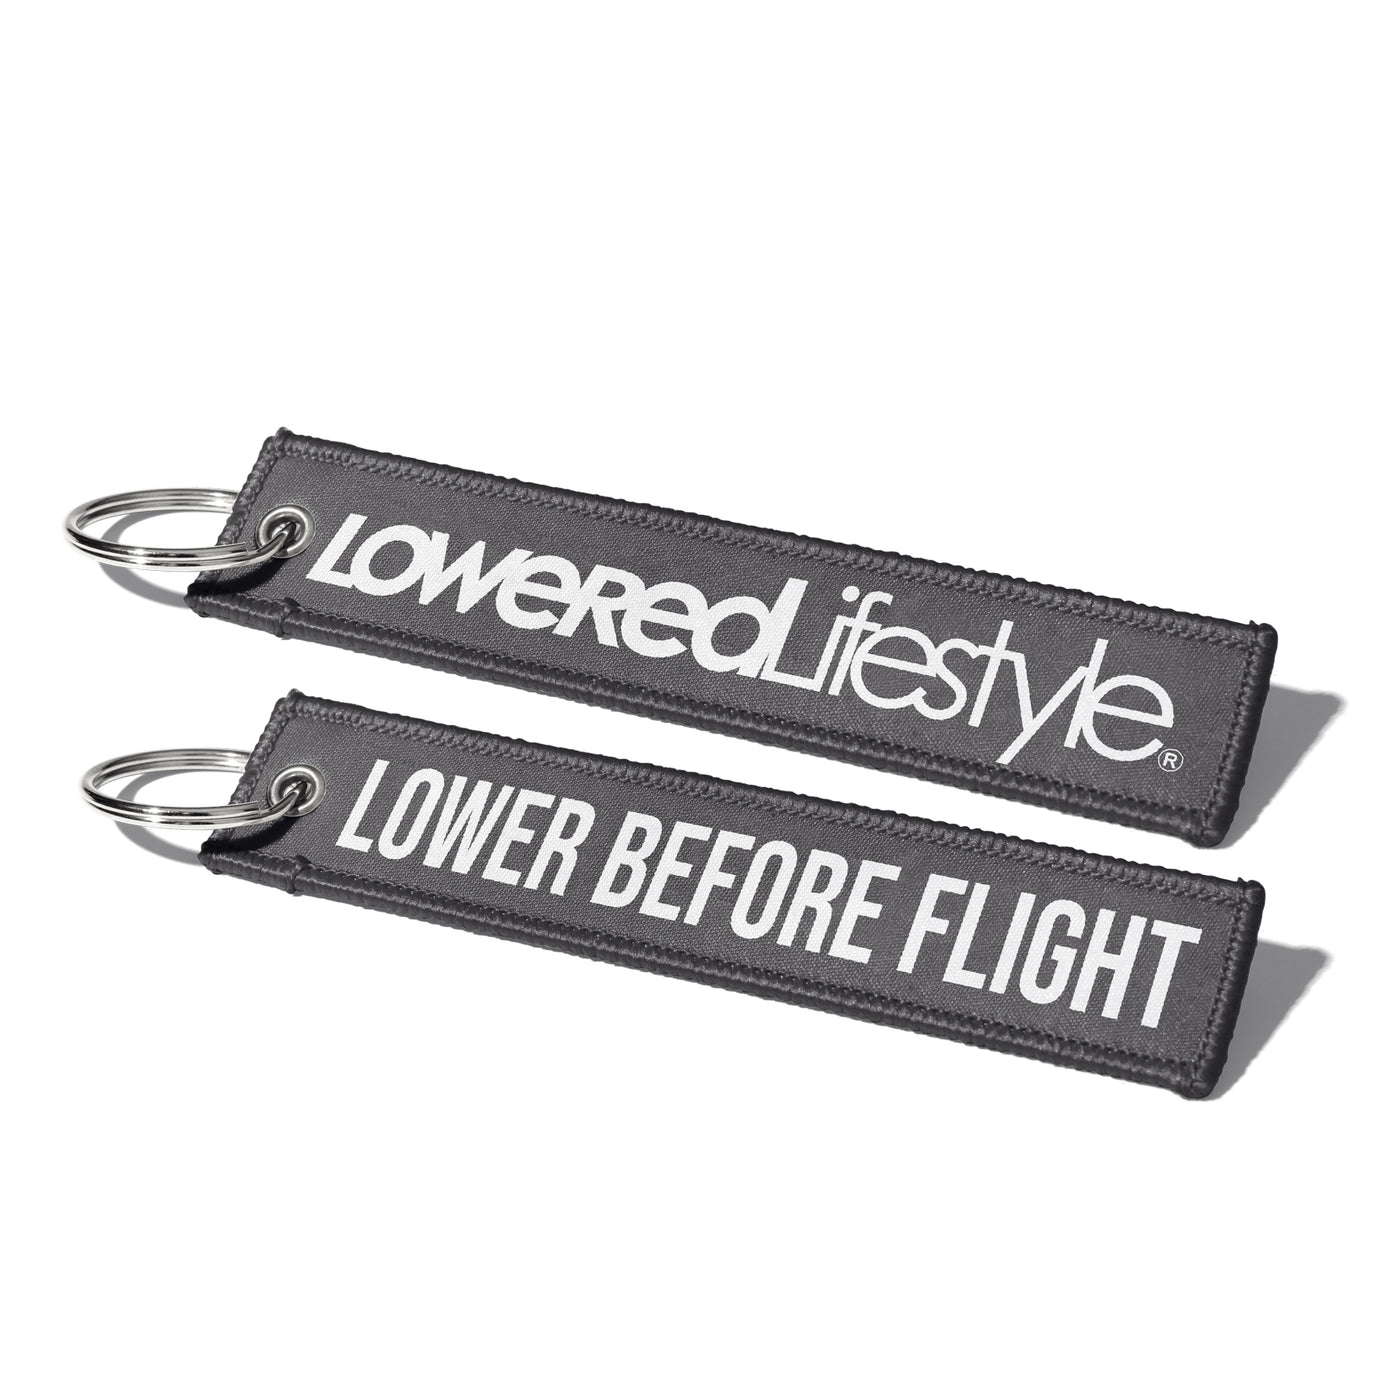 Flight Tag - Lower Before Flight (Charcoal / White)